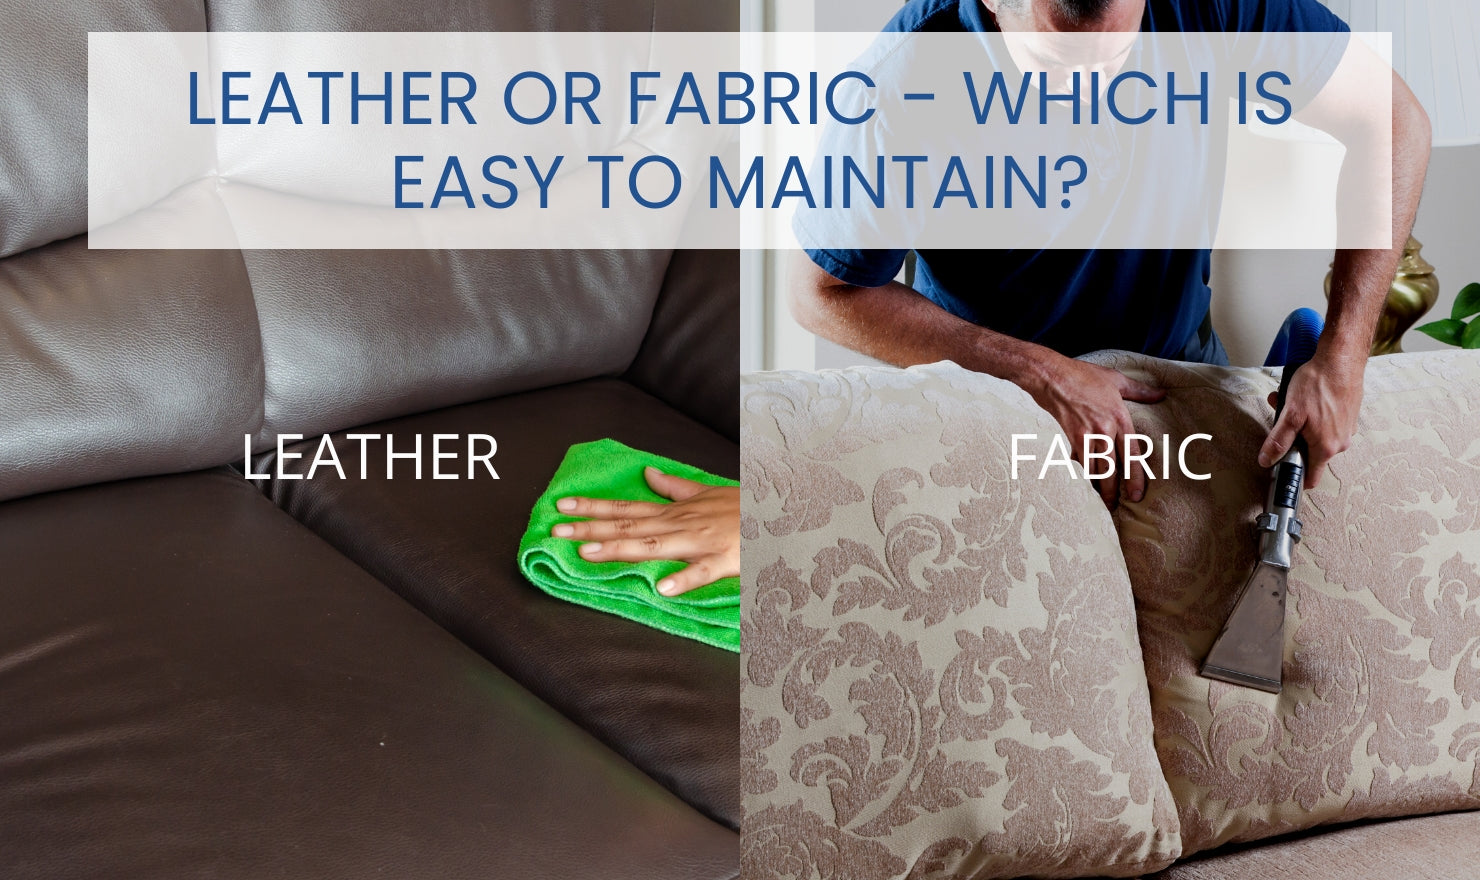 Leather or fabric - which is easy to maintain